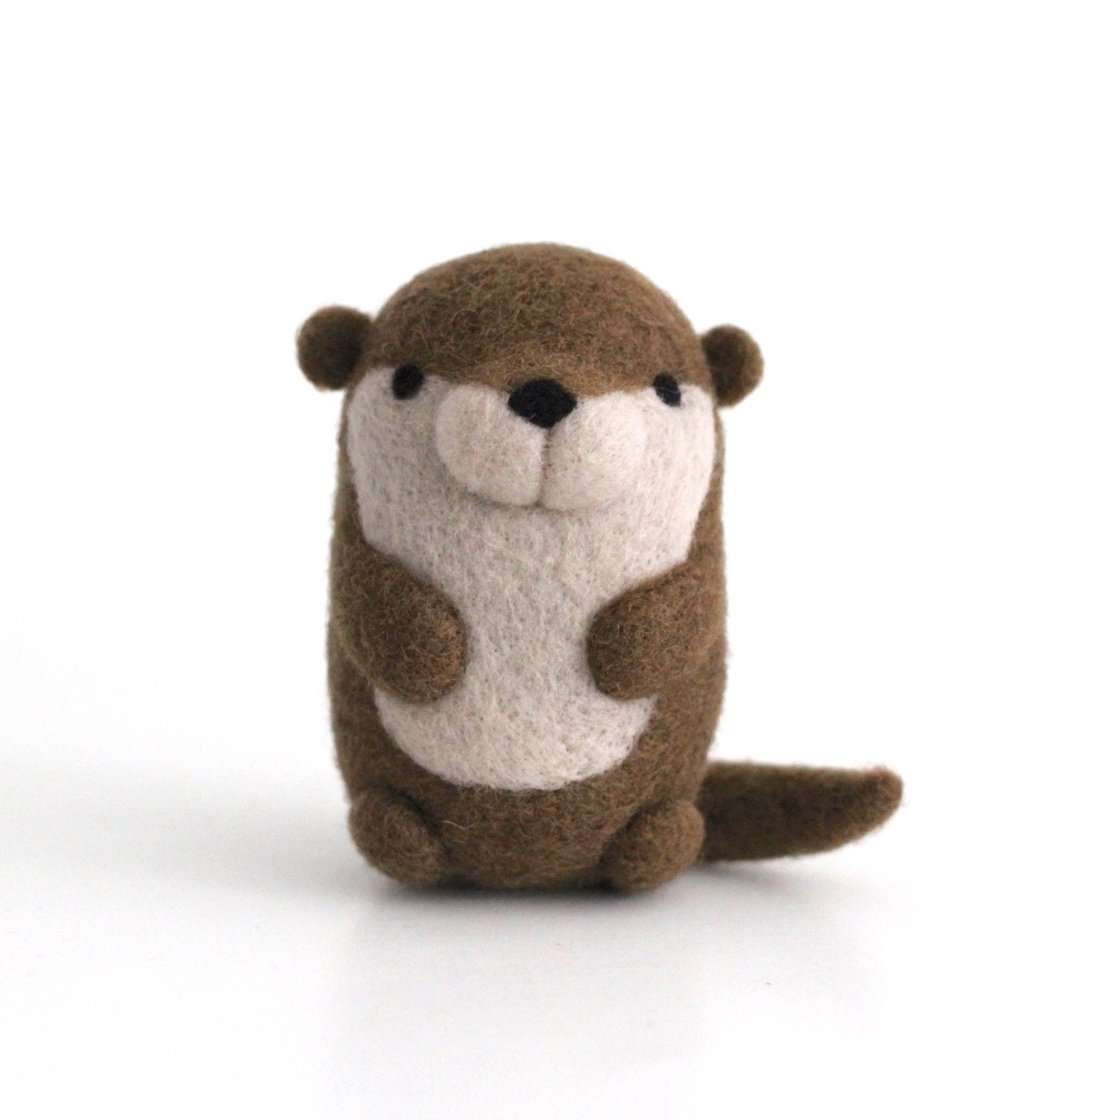 Needle Felted River Otter by Wild Whimsy Woolies